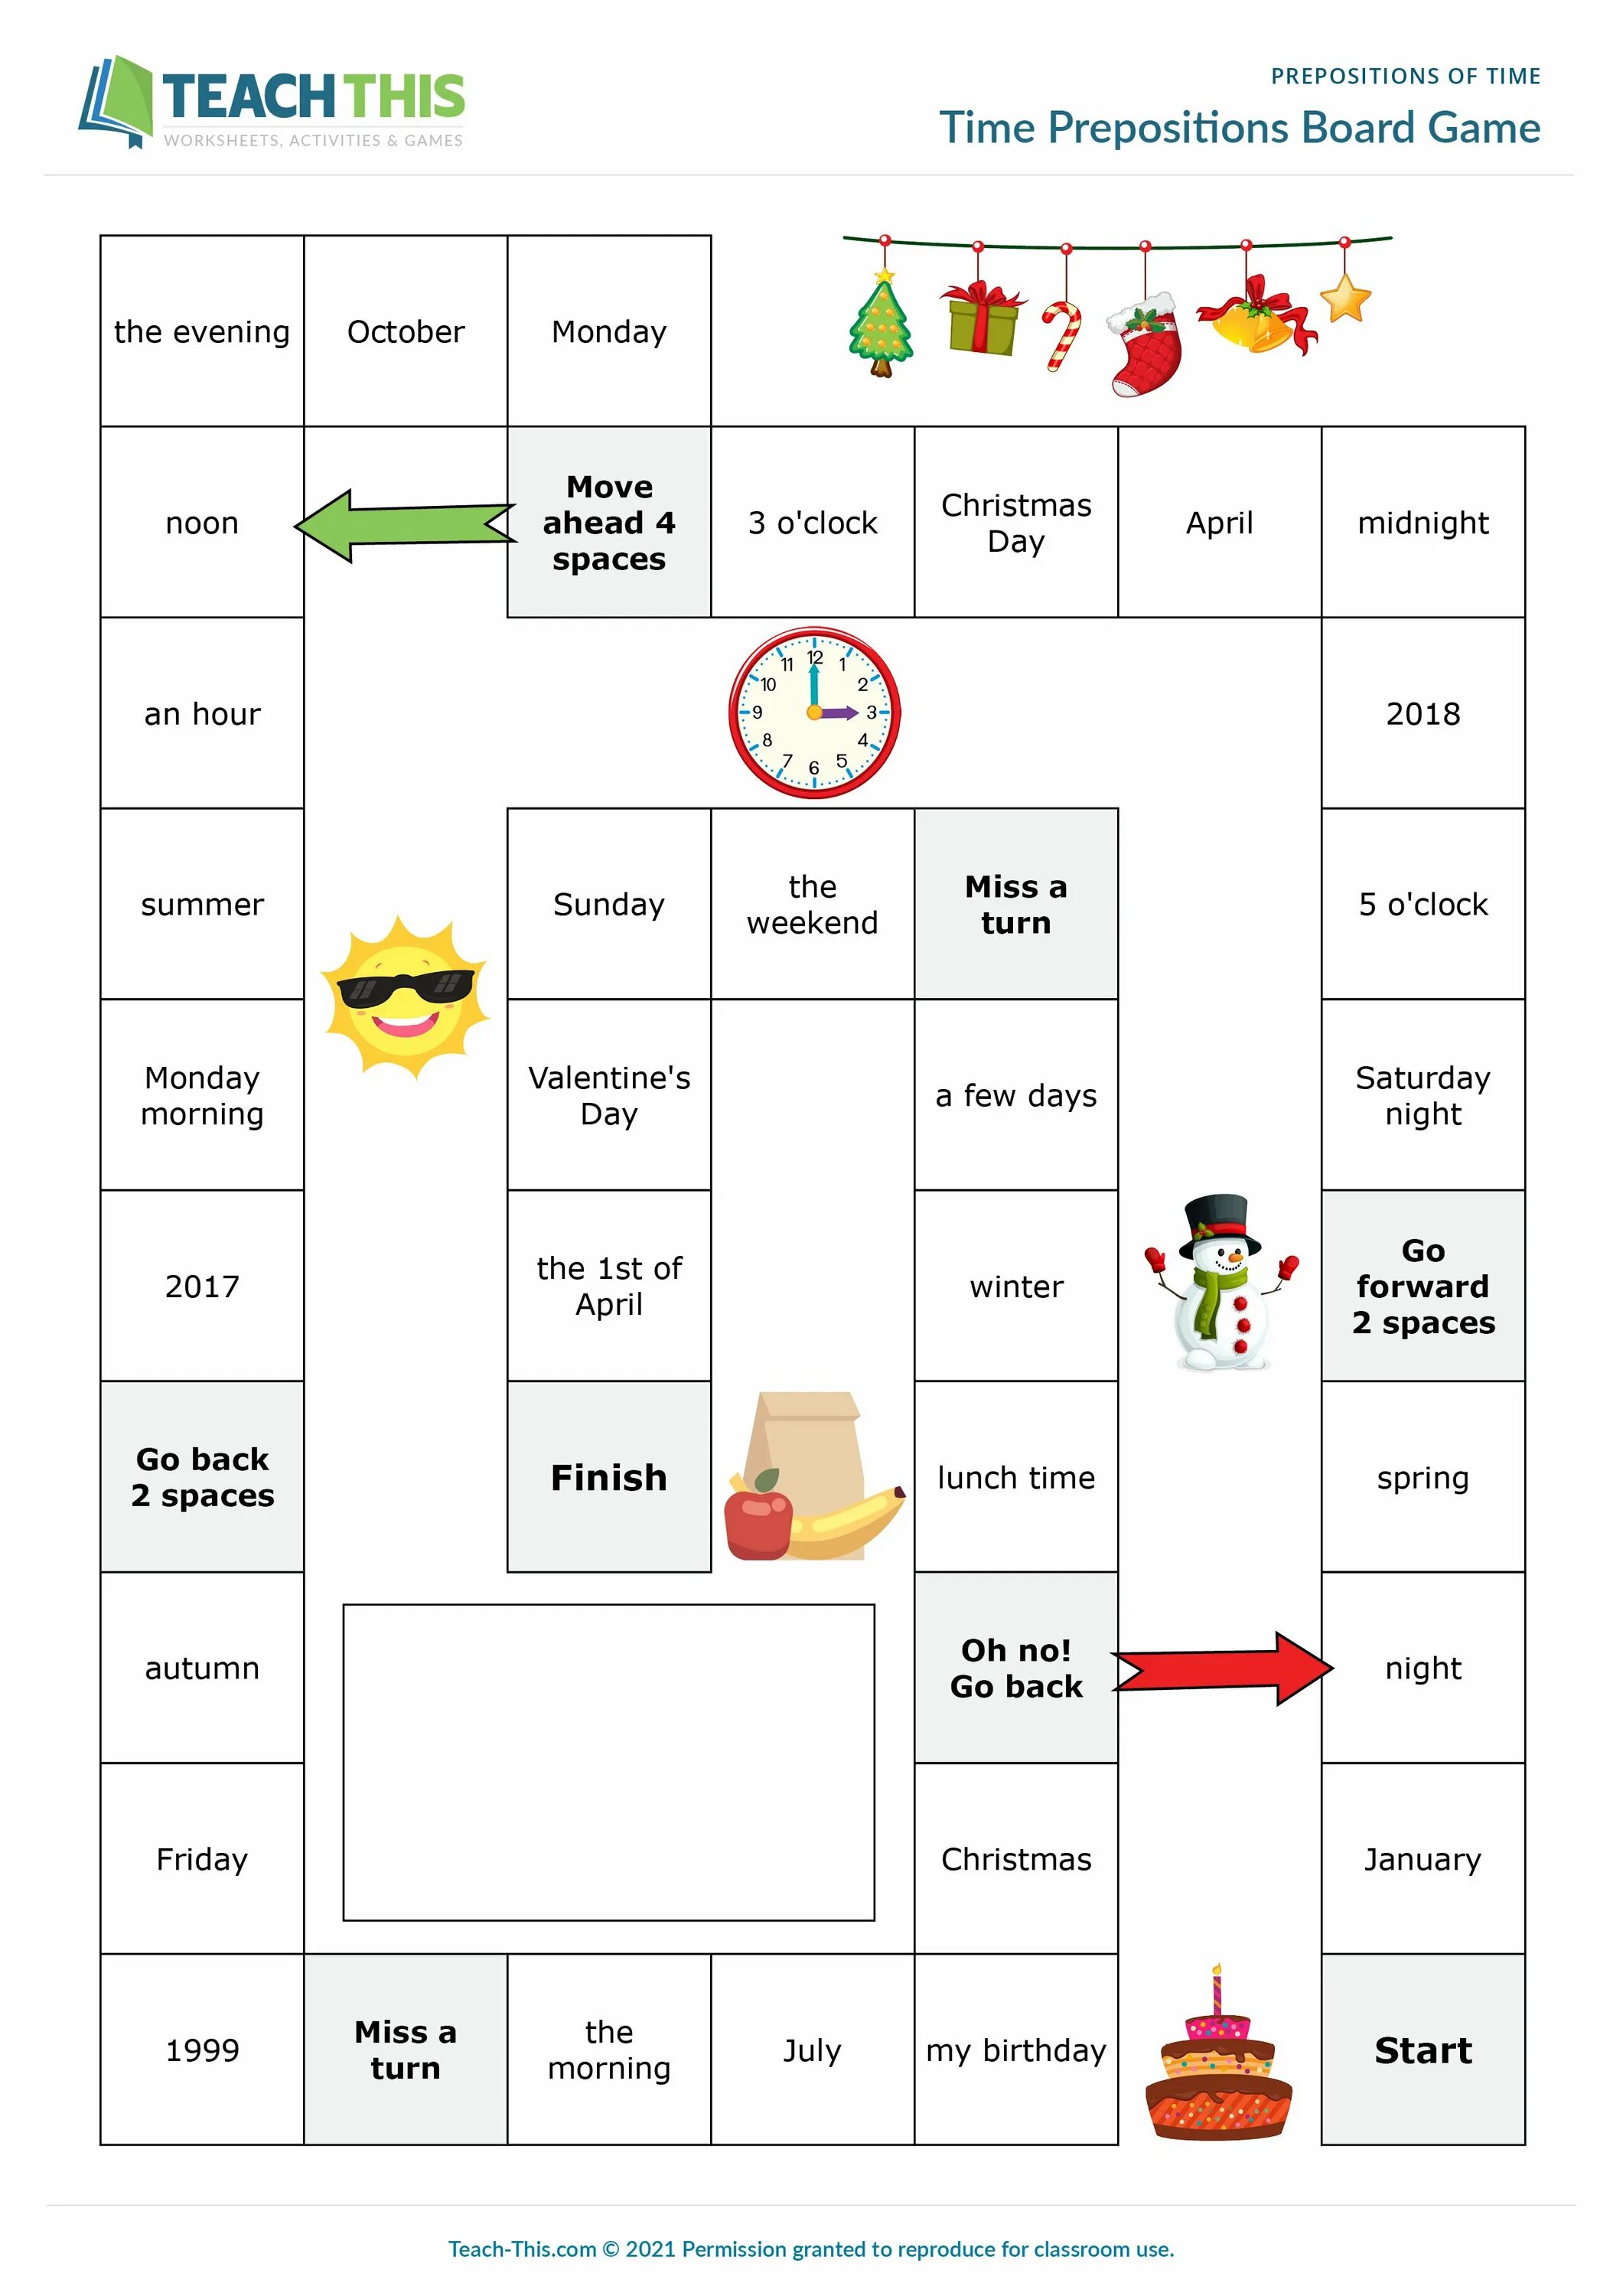 We teach this. Prepositions Board game. Prepositions of time Board game. Prepositions of time ESL games. Prepositions of time and place Board game.